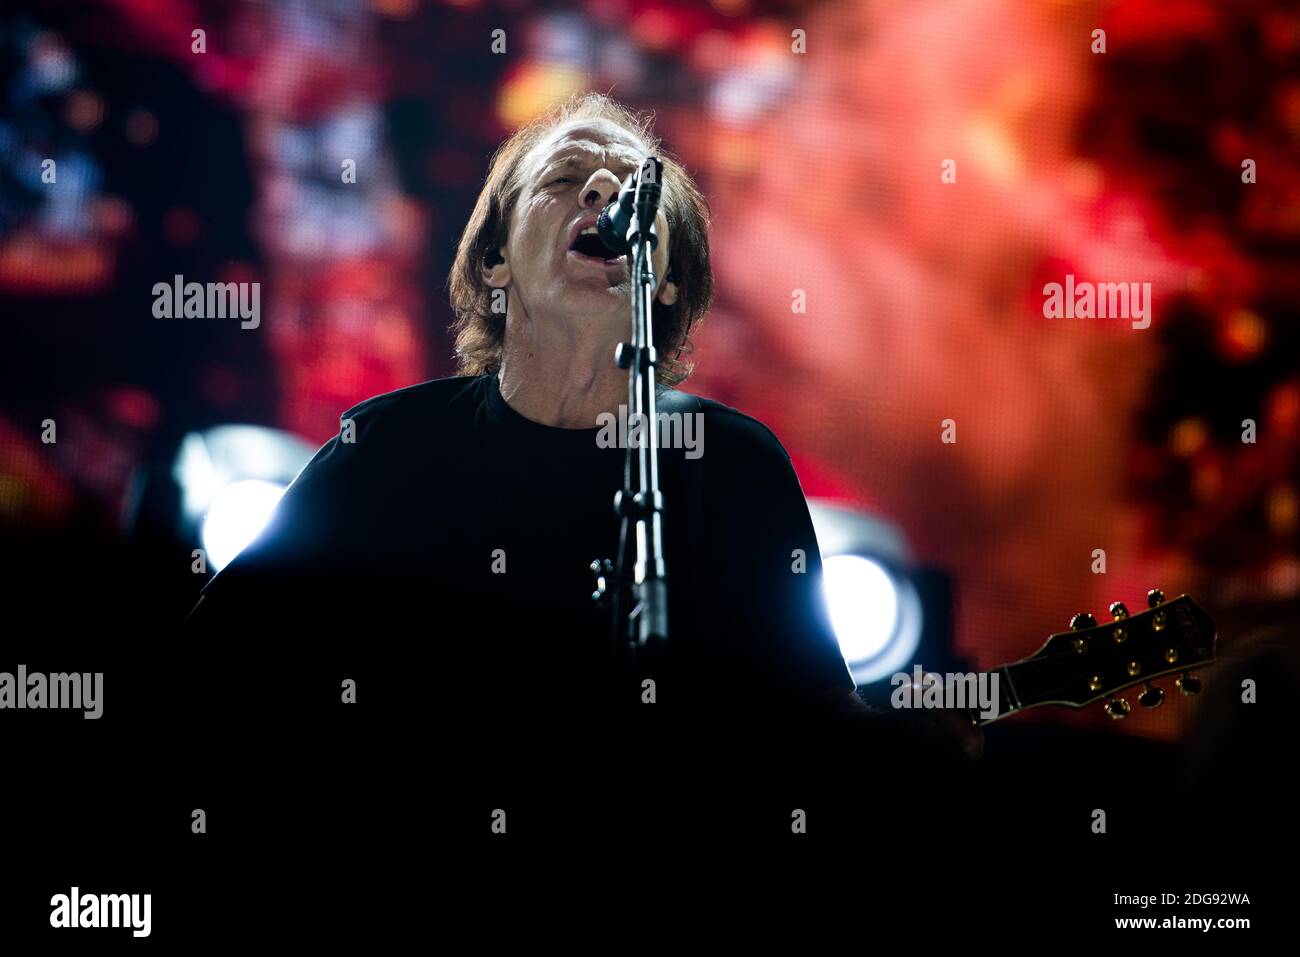 Stevie Young, of the Australian rock band AC/DC, performing live for the 'Rock or Bust World Tour' at the Autodromo Enzo e Dino Ferrari of Imola, Italy Stock Photo